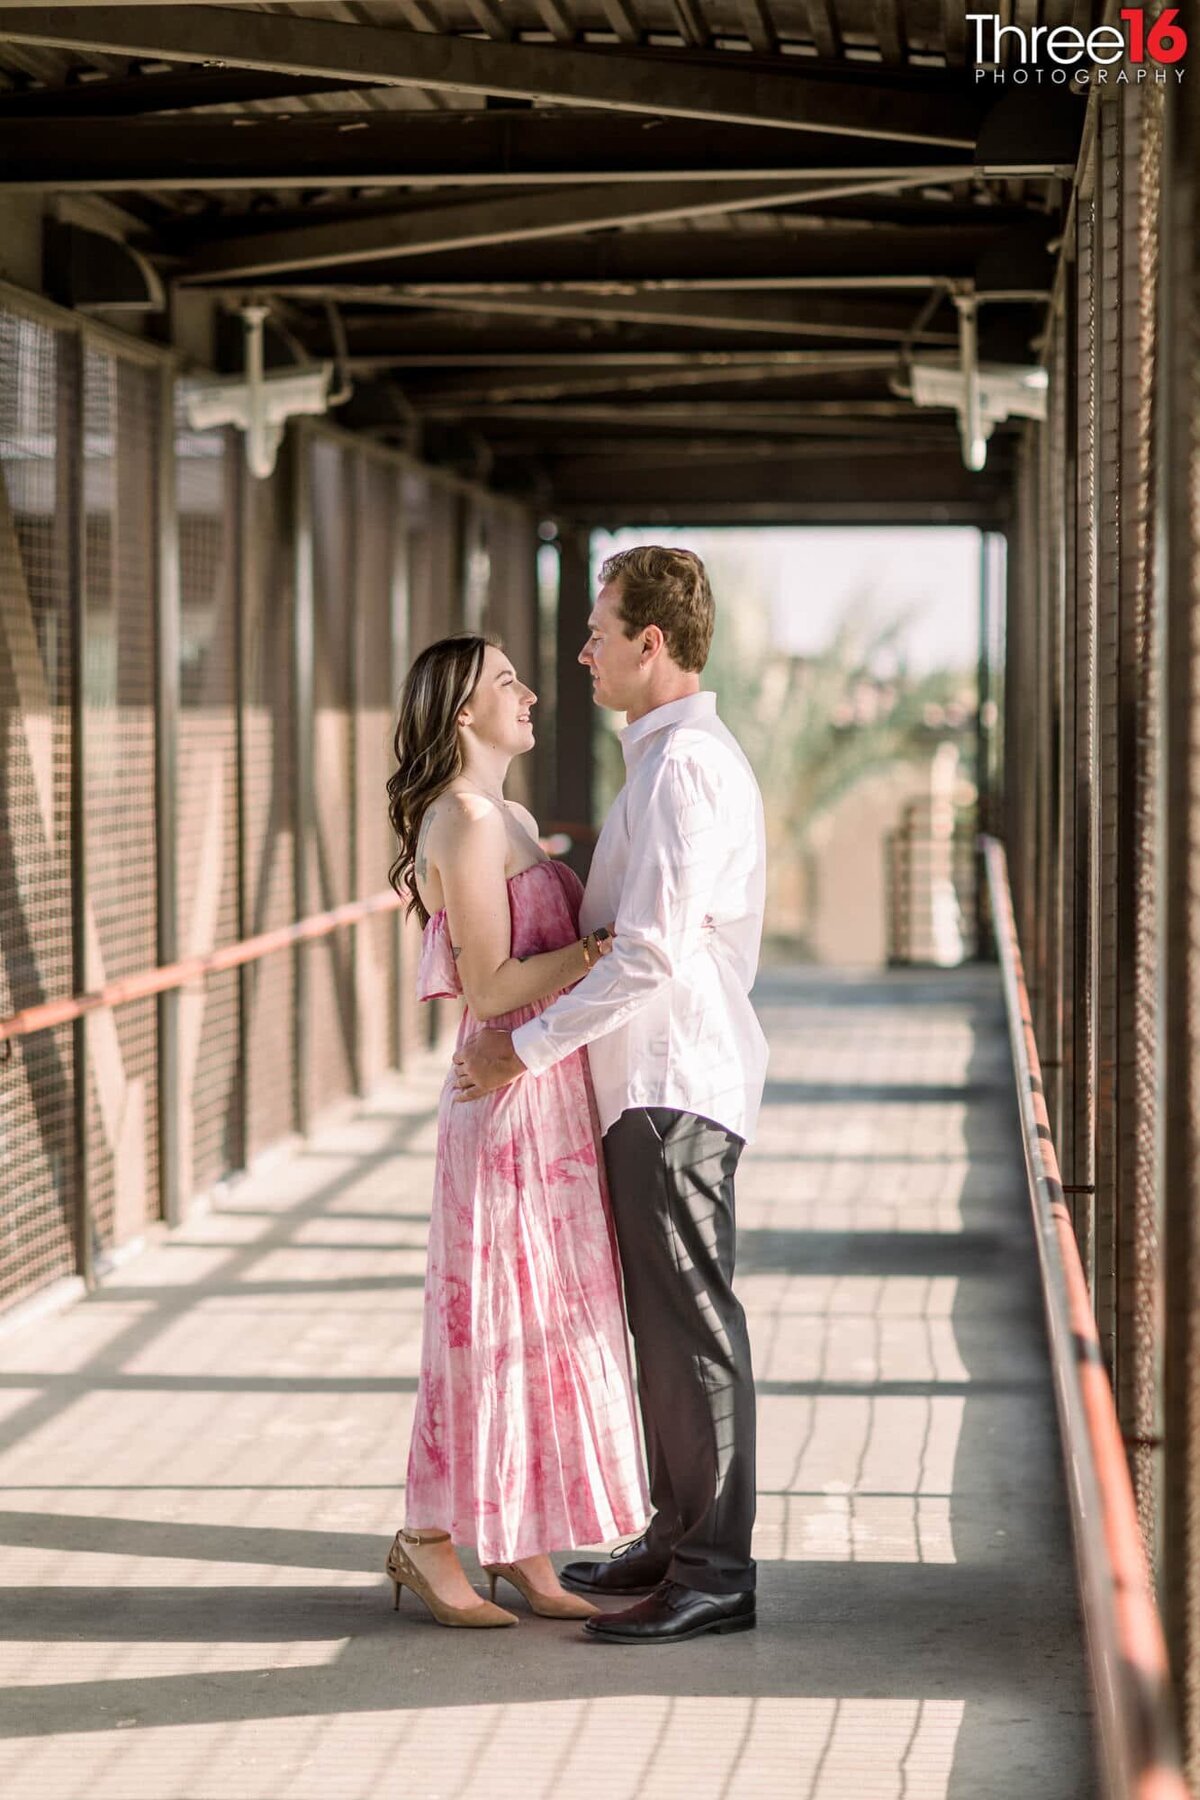 Engaged couple gaze at each other standing on a bridge over the train tracks in Fullerton